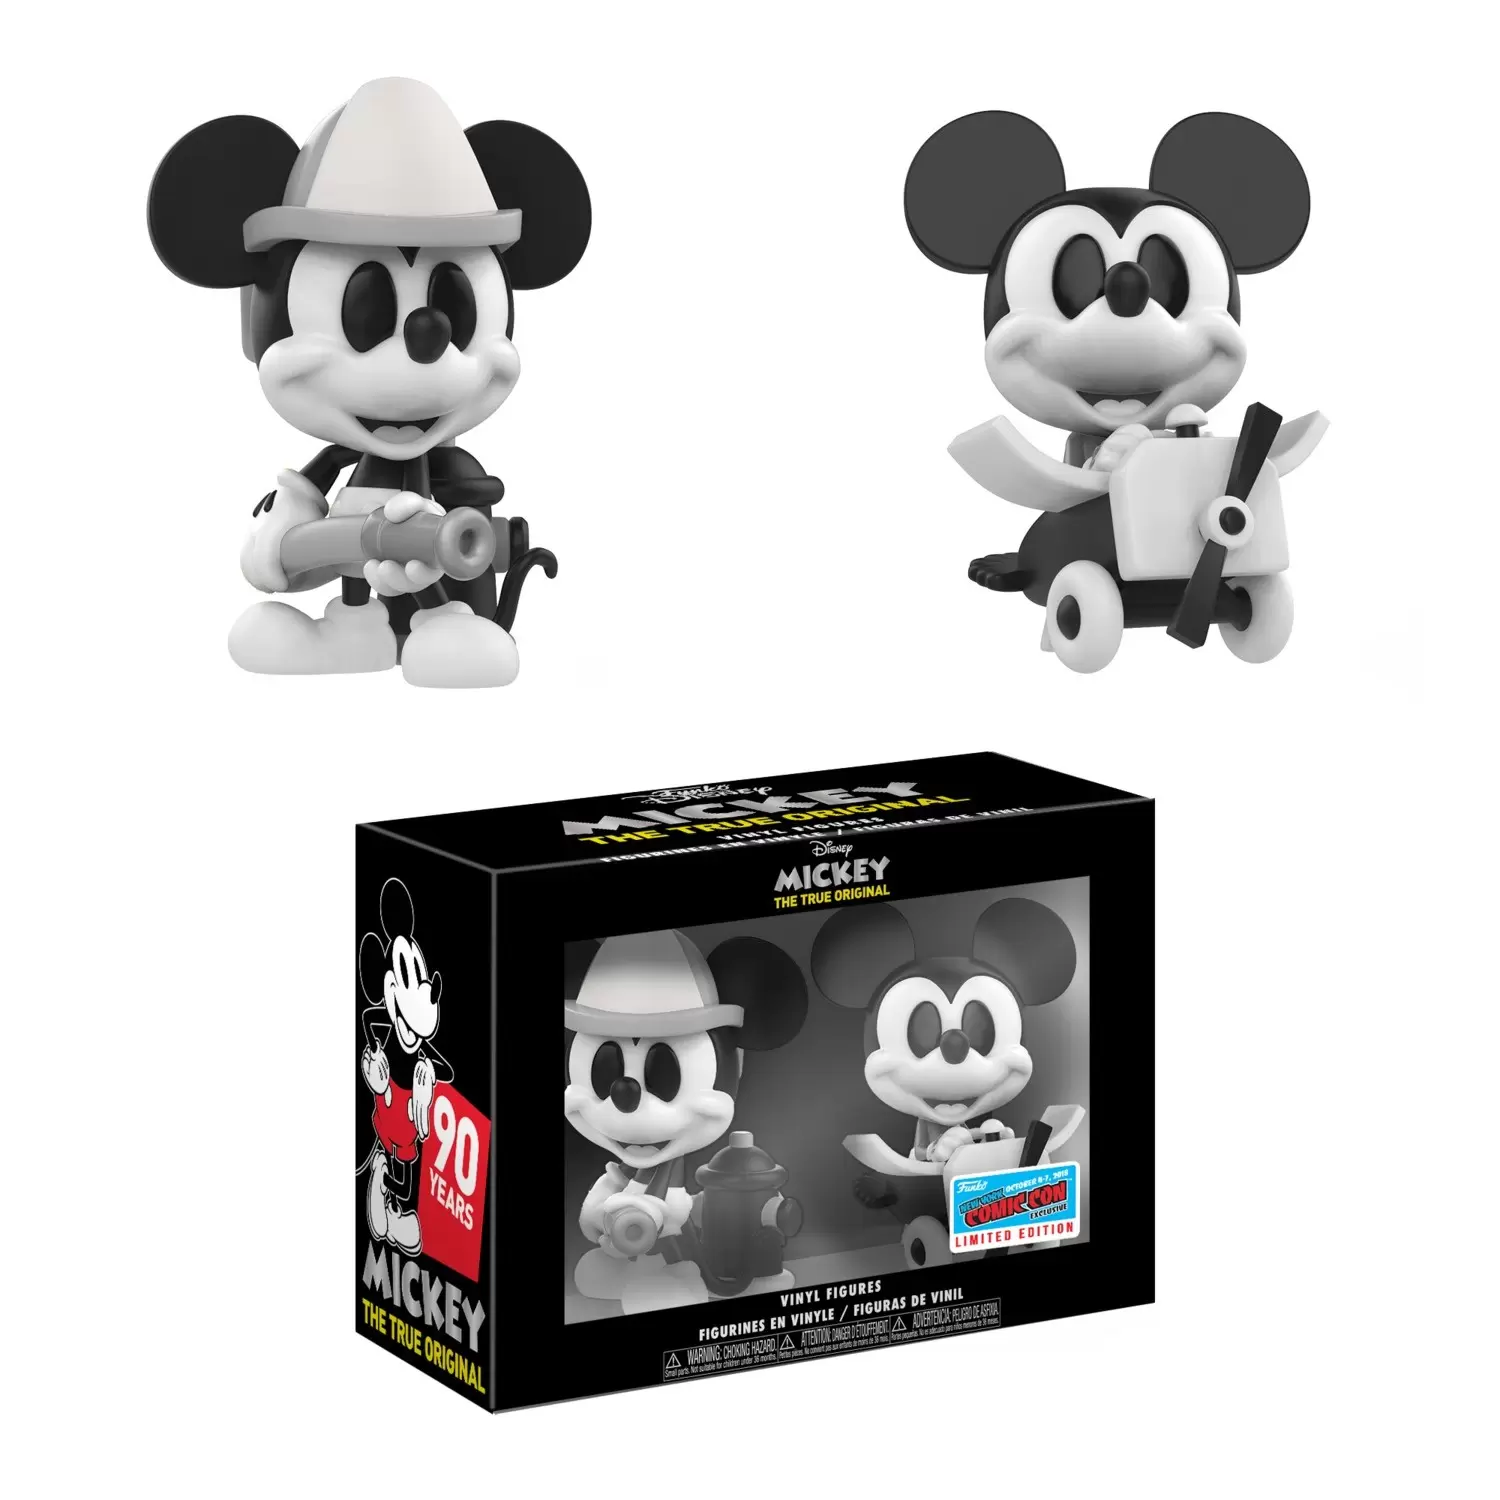 Disney - Mickey Mouse 90th Anniversary - Disney - Mickey Mouse Black & White 2 Pack